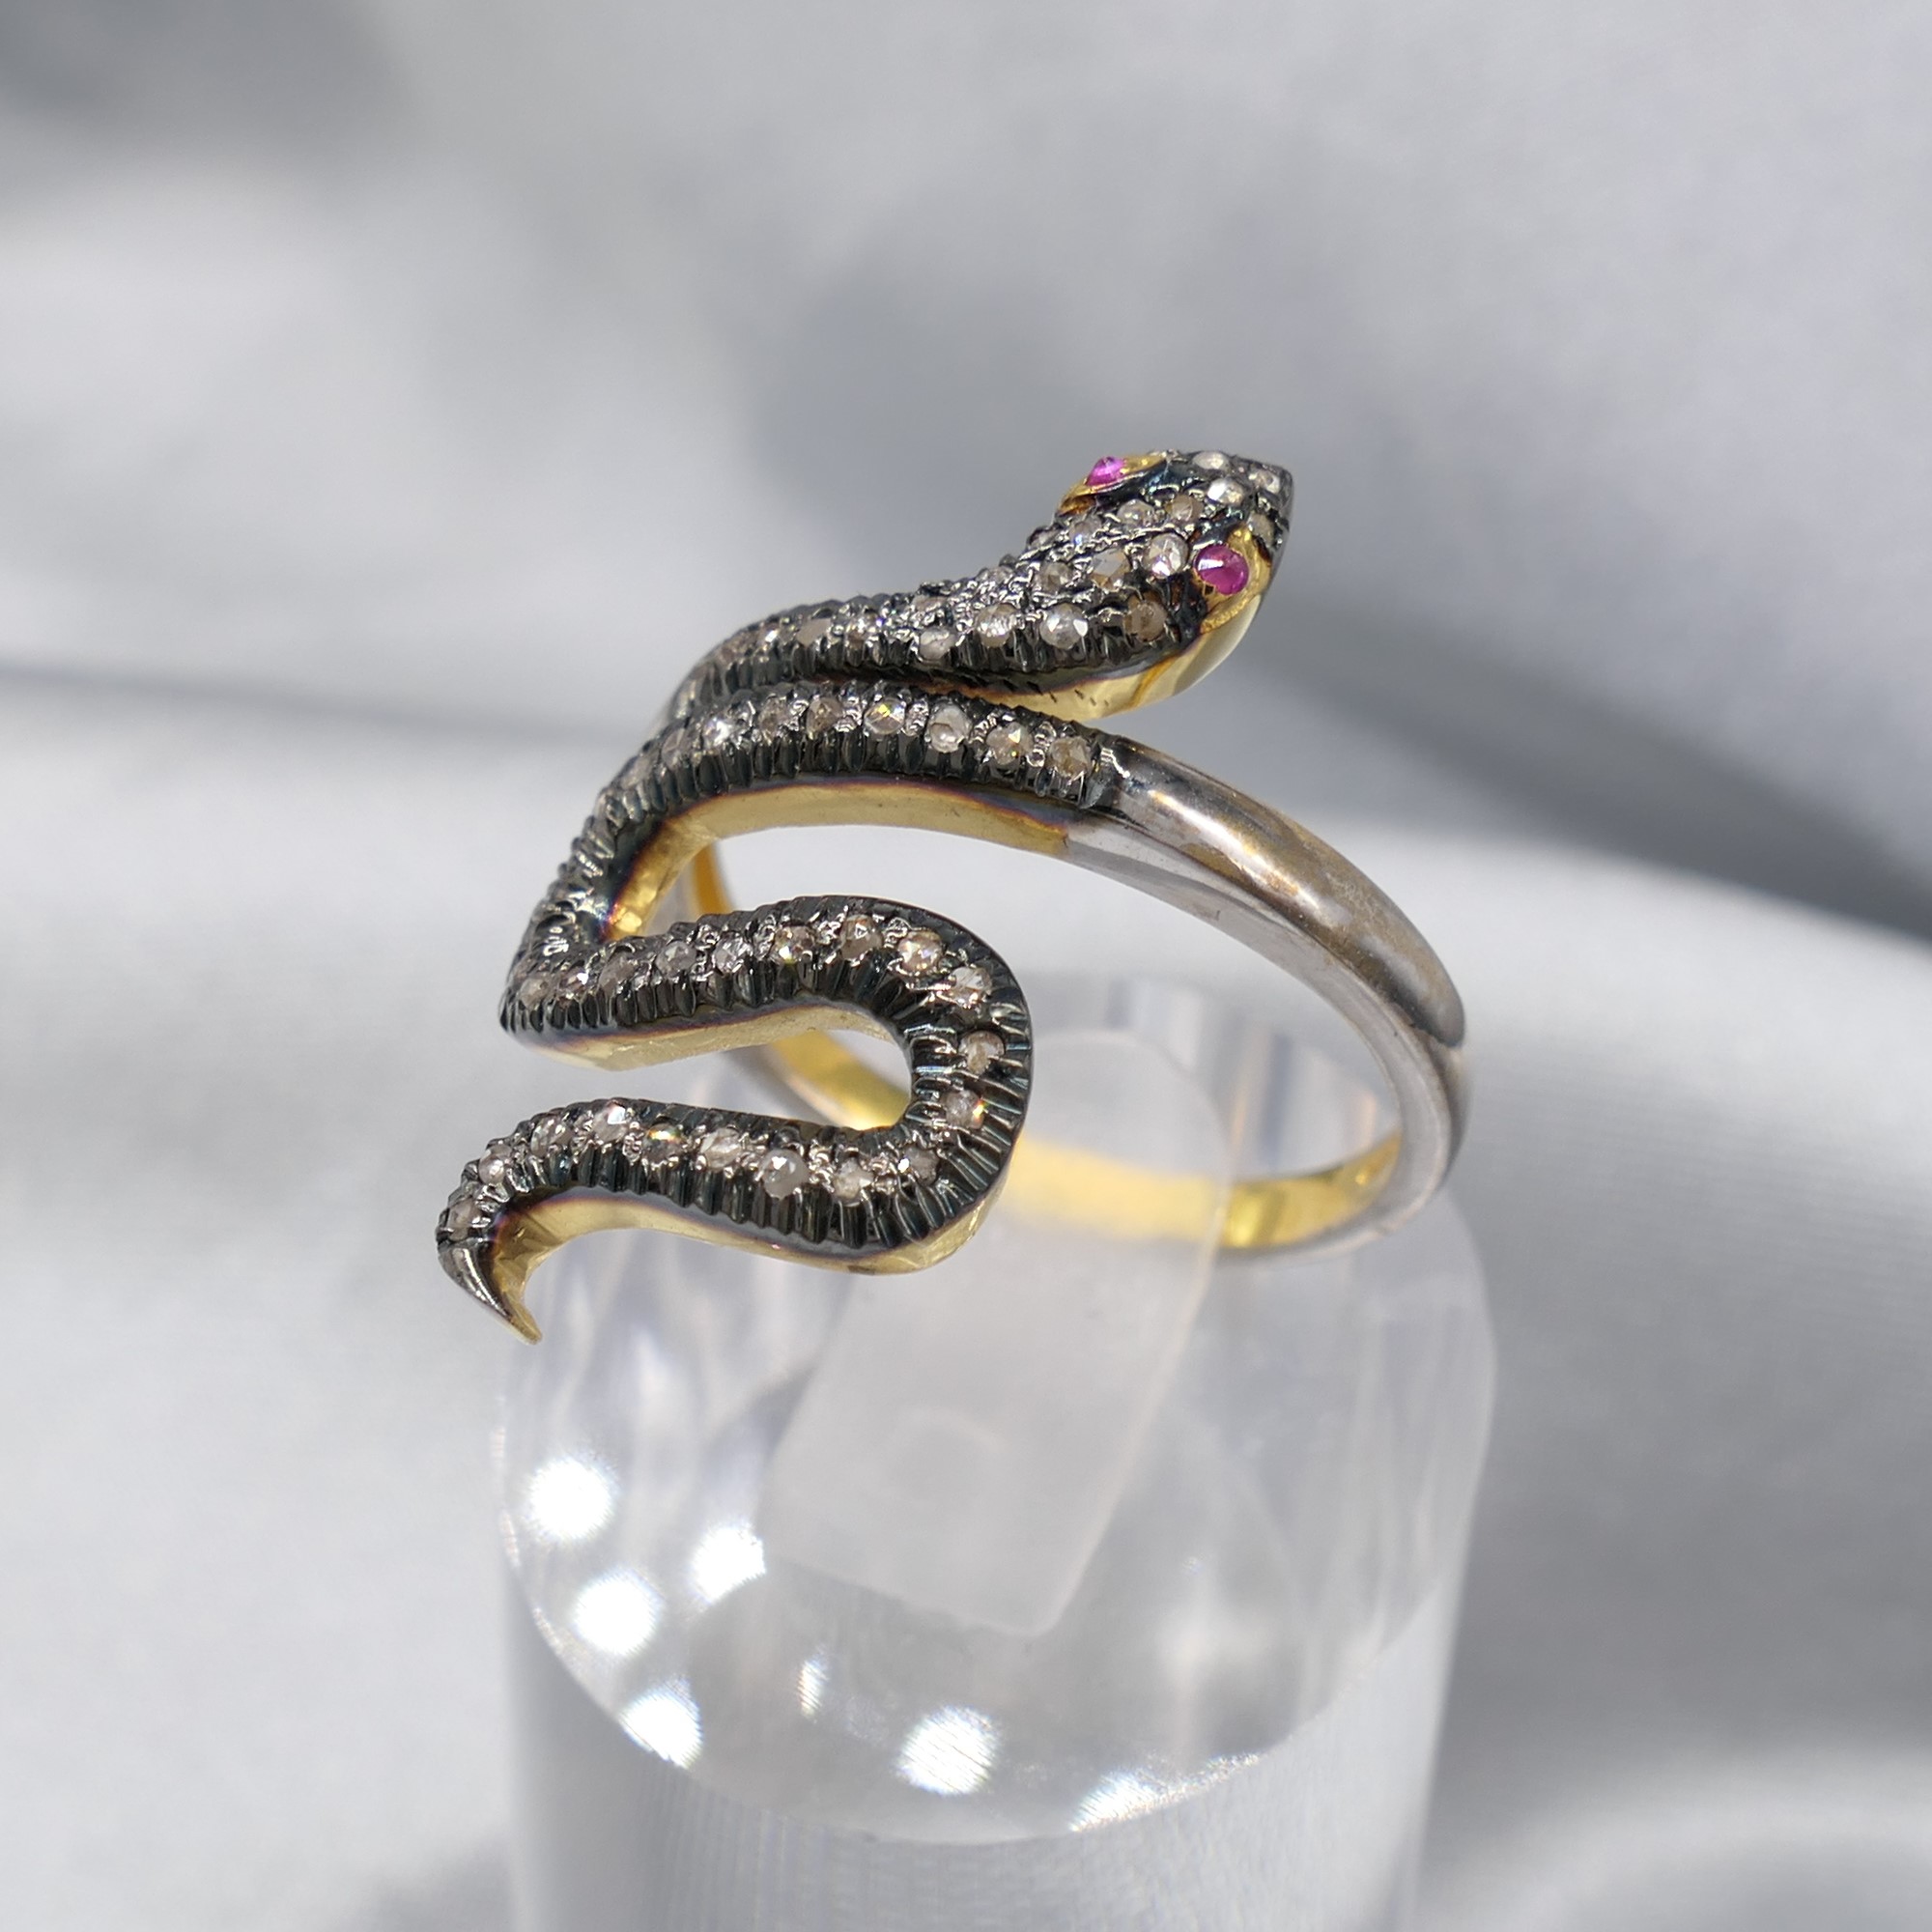 Unusual Hand Made Diamond and Ruby Snake Ring - Image 6 of 6